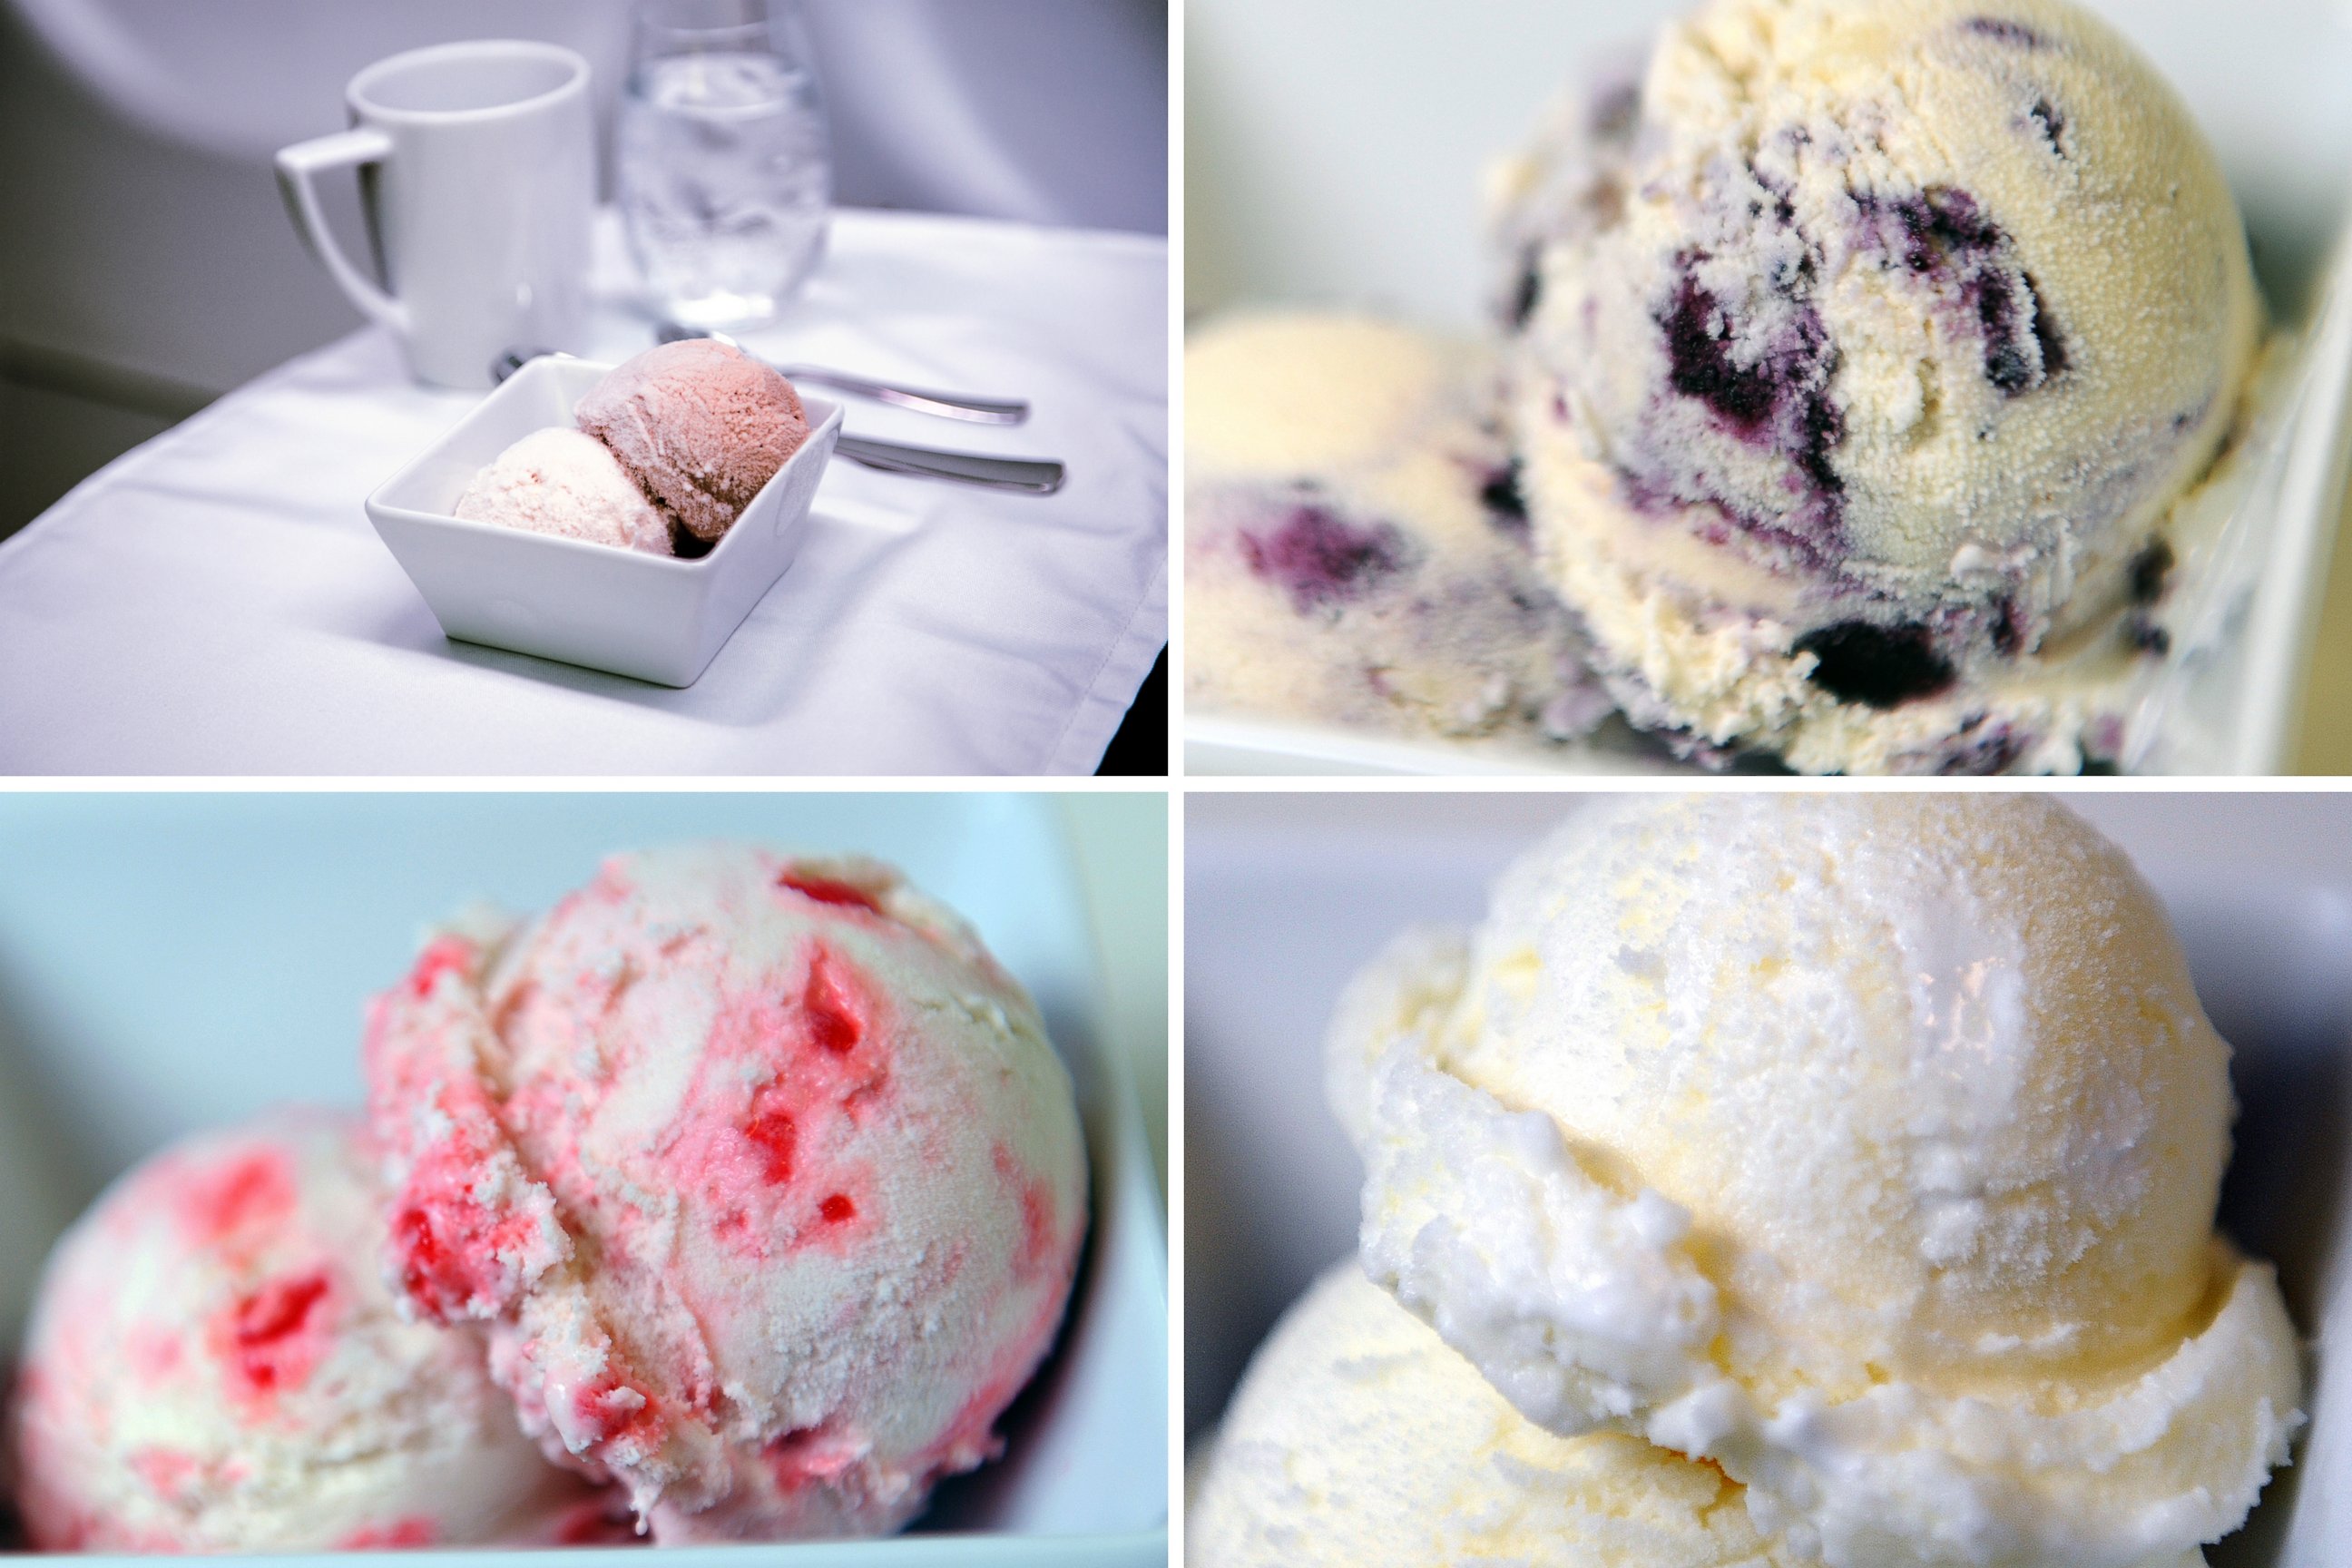 PHOTO: Virgin America’s "First Class Menu" will soon feature a signature ice cream flavor created by San Francisco-based parlor Humphry Slocumbe.